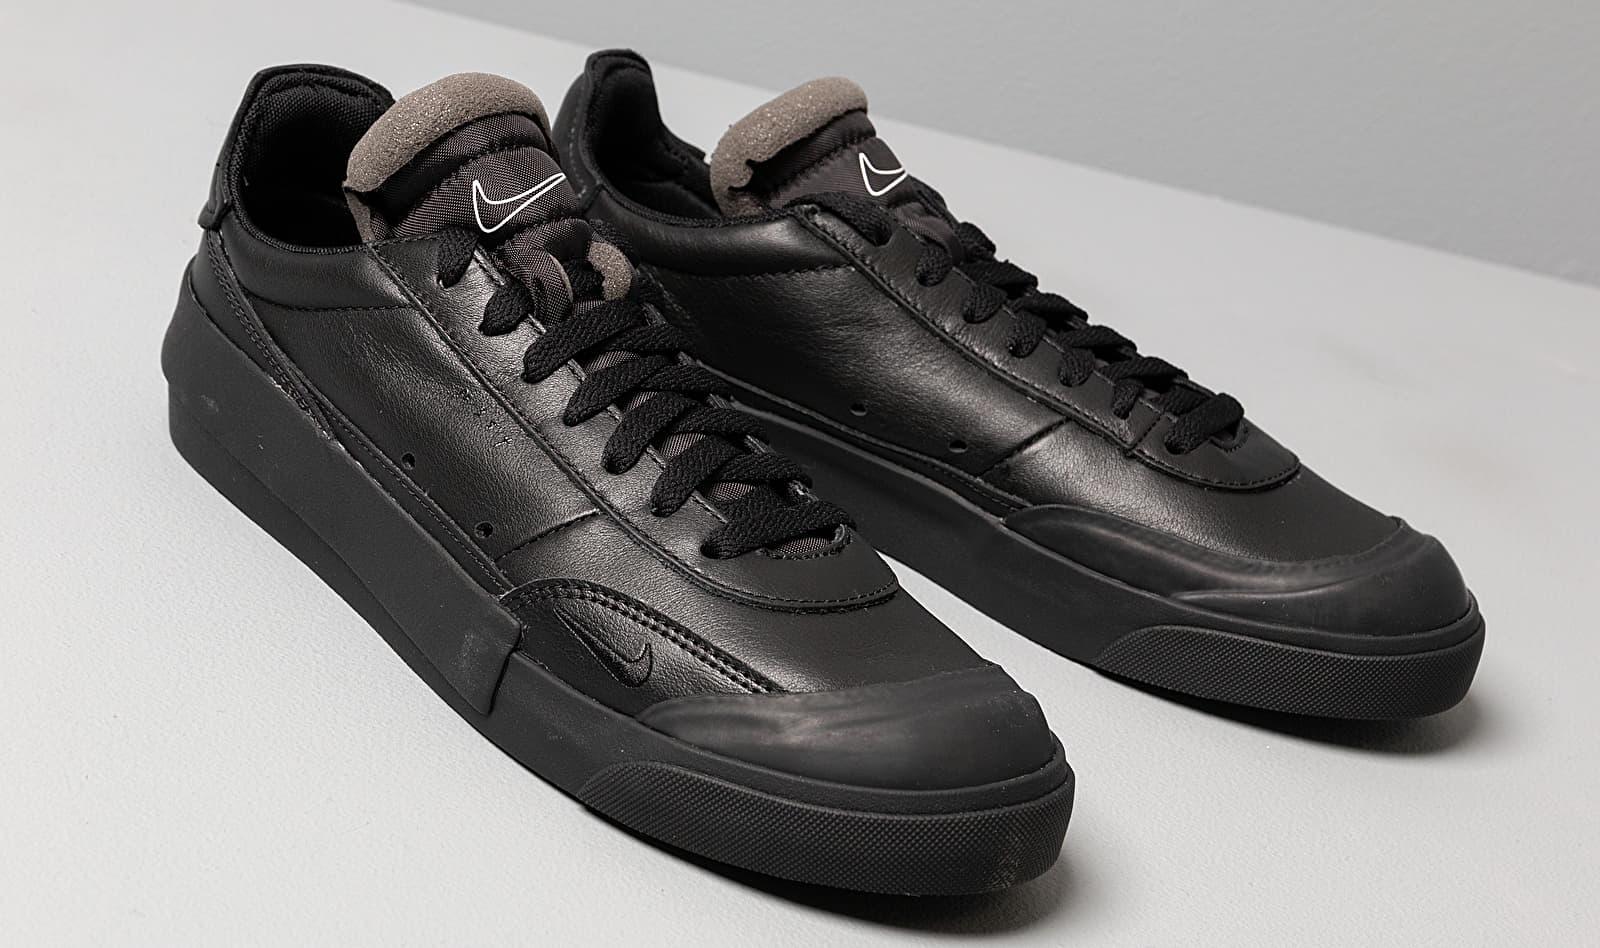 Nike Drop-type Leather Premium in Black & White (Black) for Men - Save 57%  - Lyst